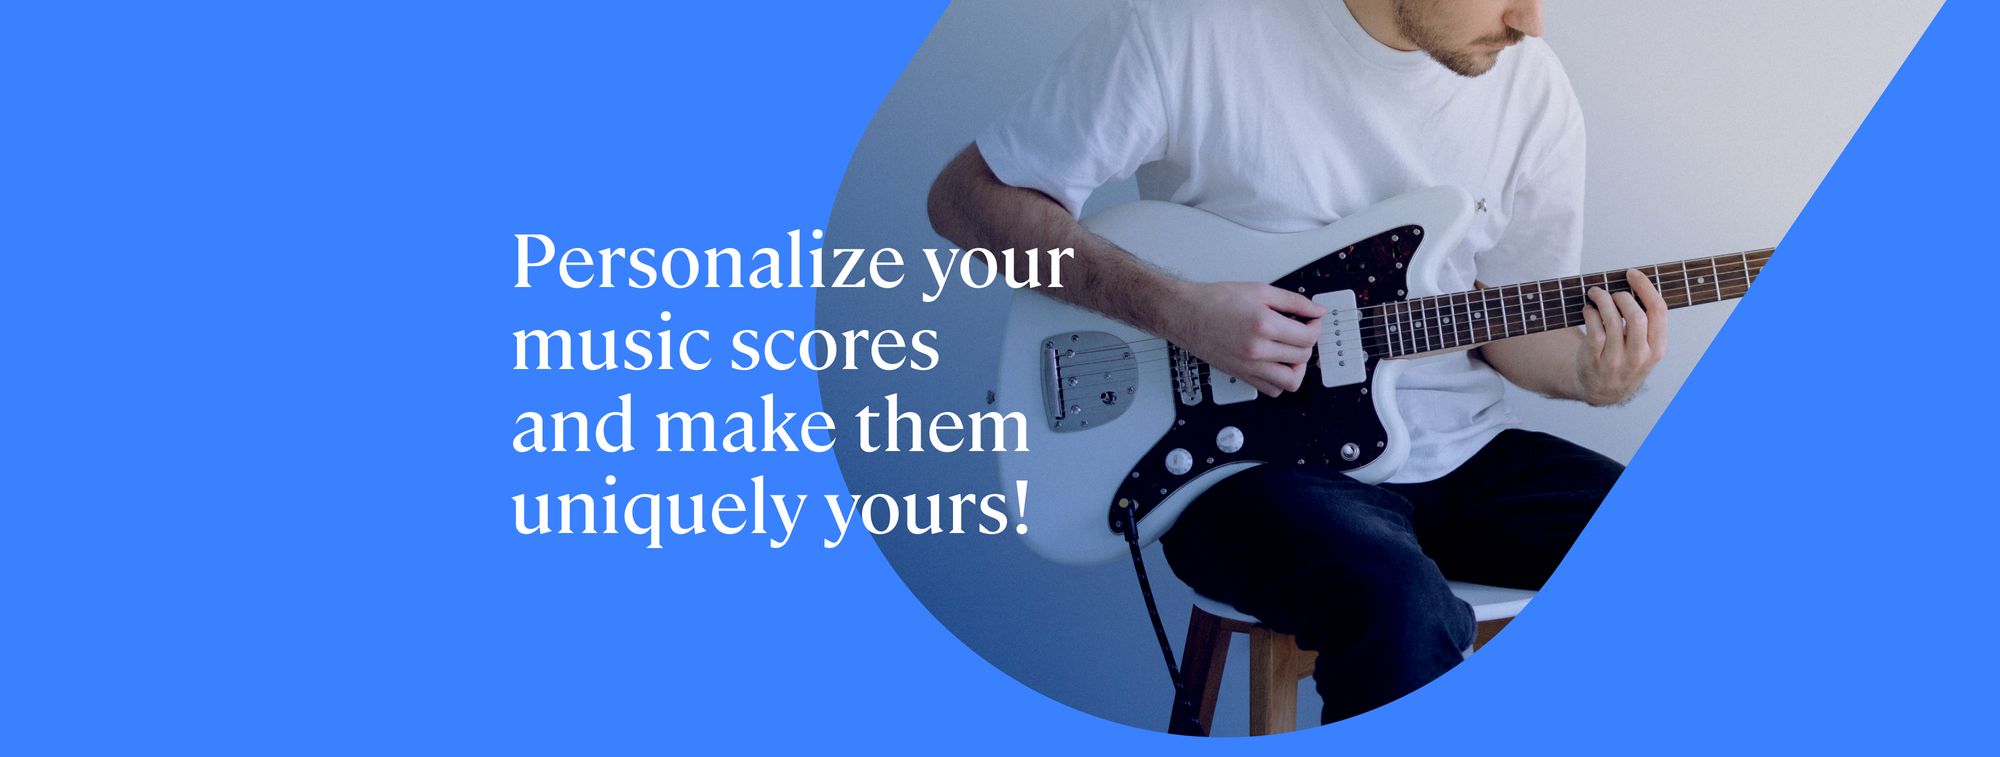 Personalize your music in Flat to make it truly yours!